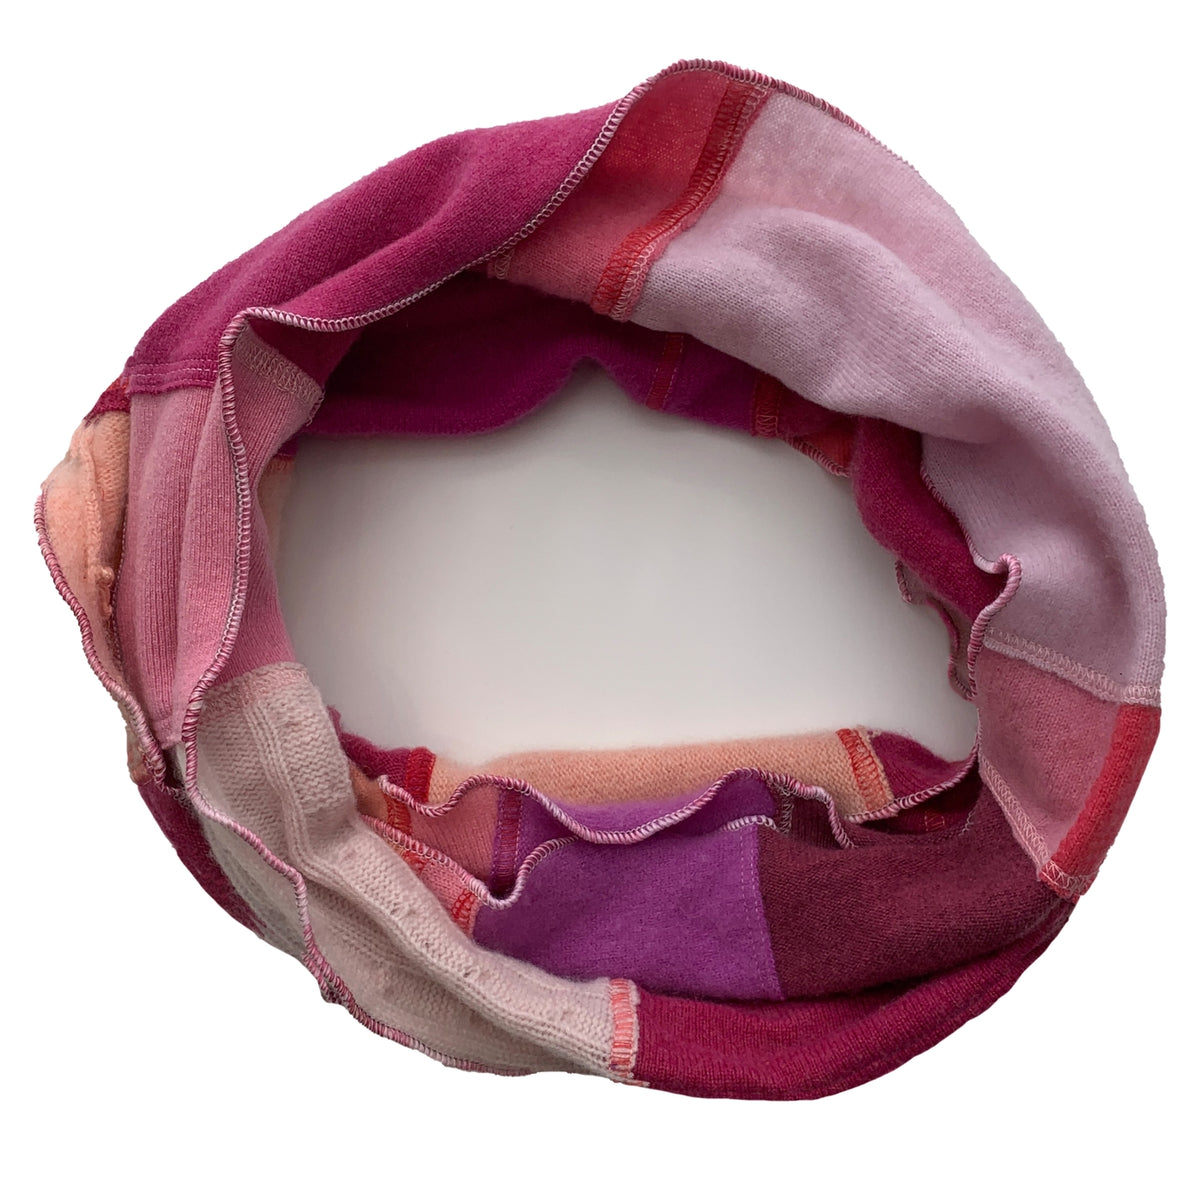 Cashmere Infinity Scarf :: A Rainbow of Colors Available